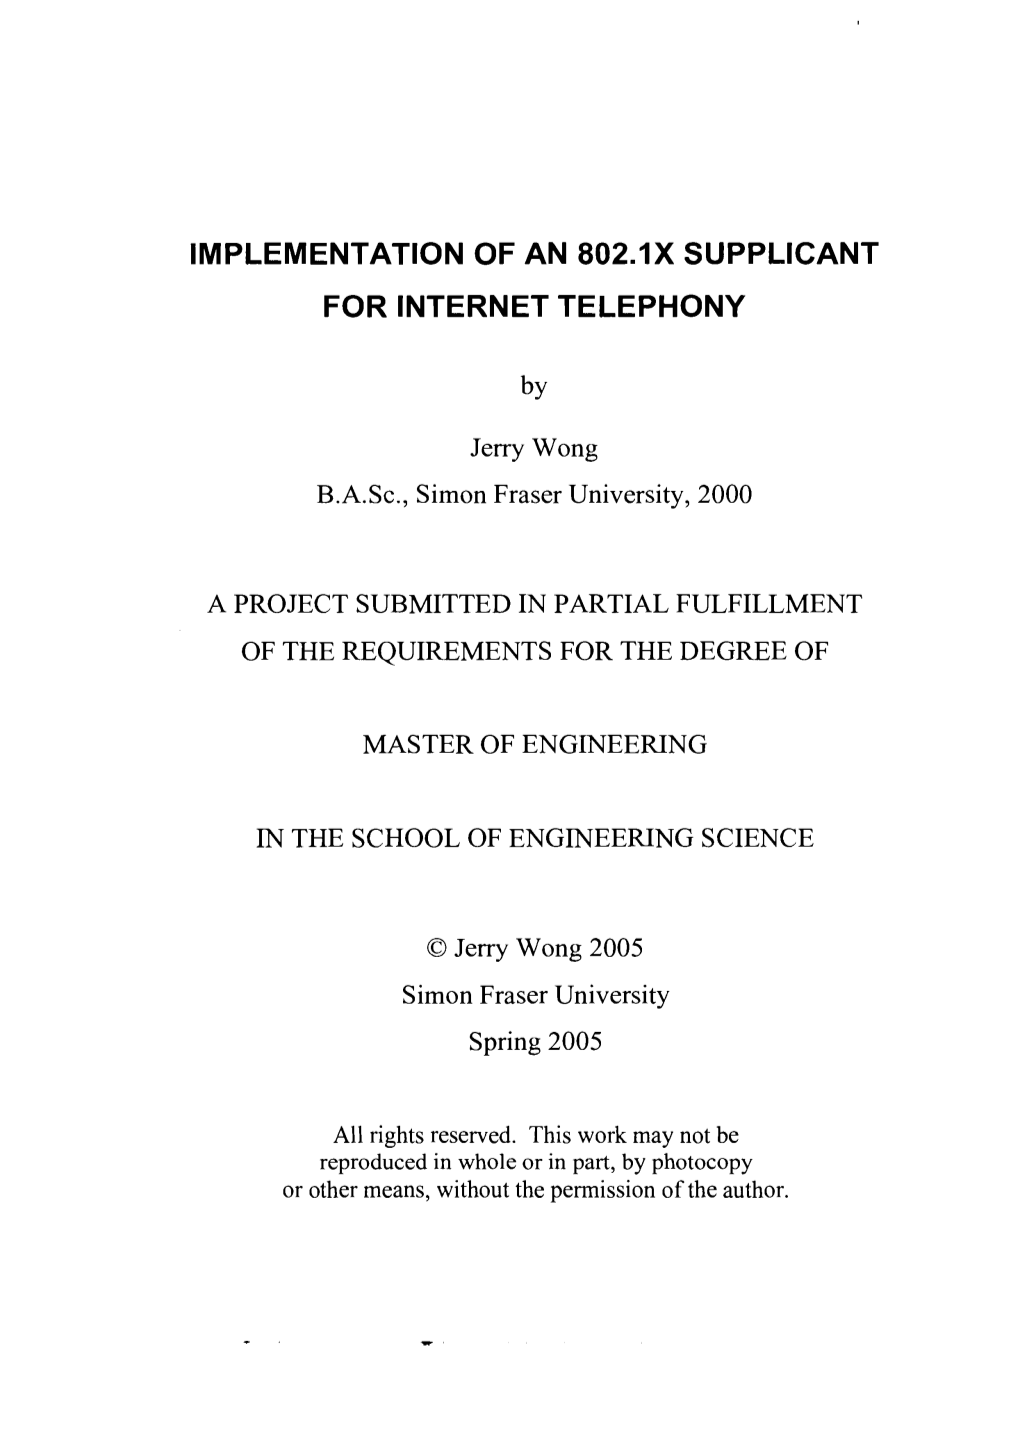 Implementation of an 802.1X Supplicant for Internet Telephony